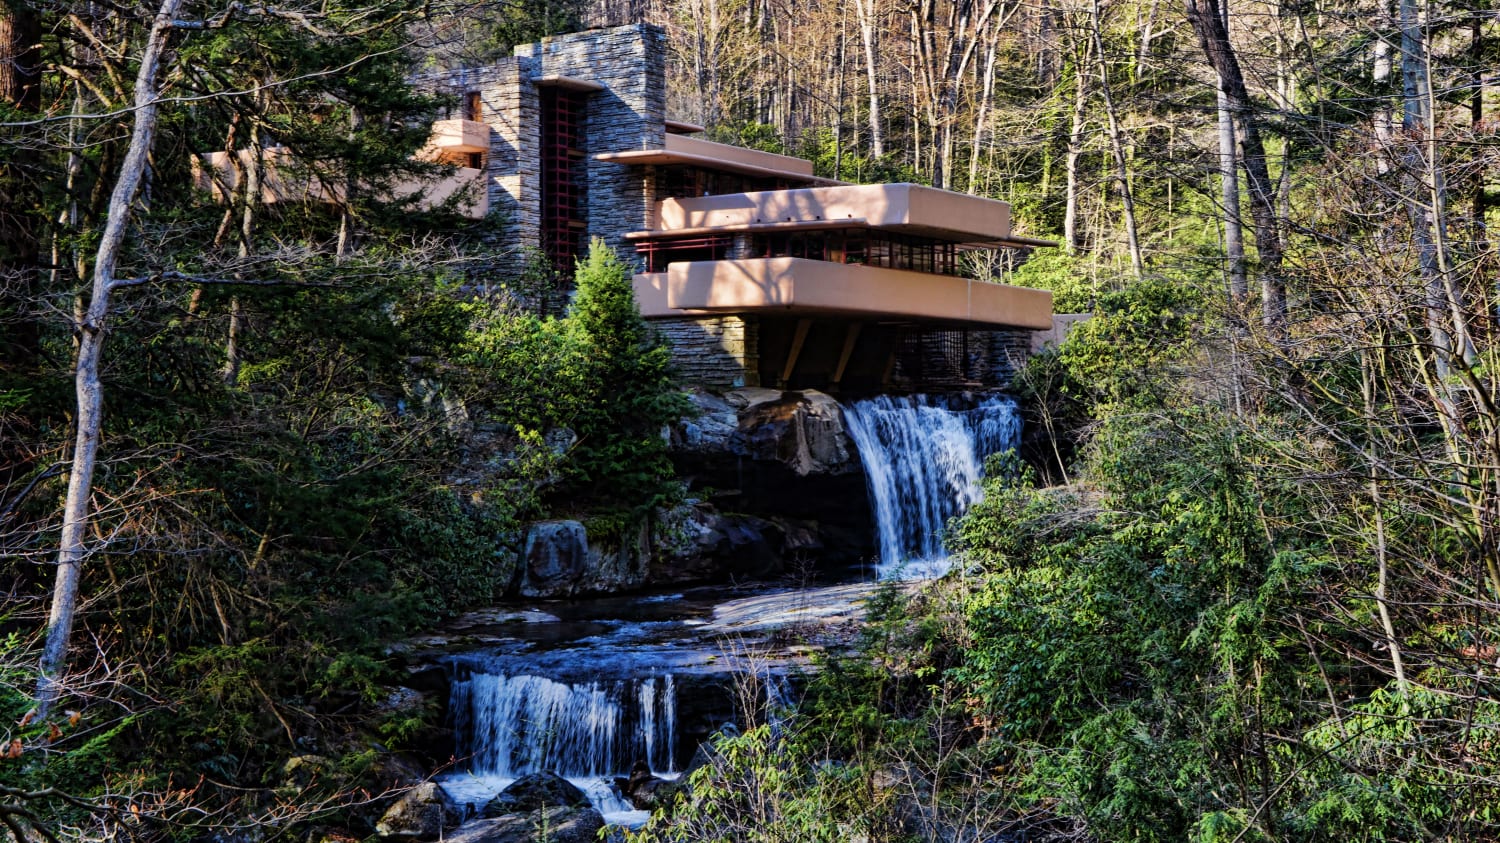 8 Frank Lloyd Wright Buildings Join the List of UNESCO World Heritage Sites